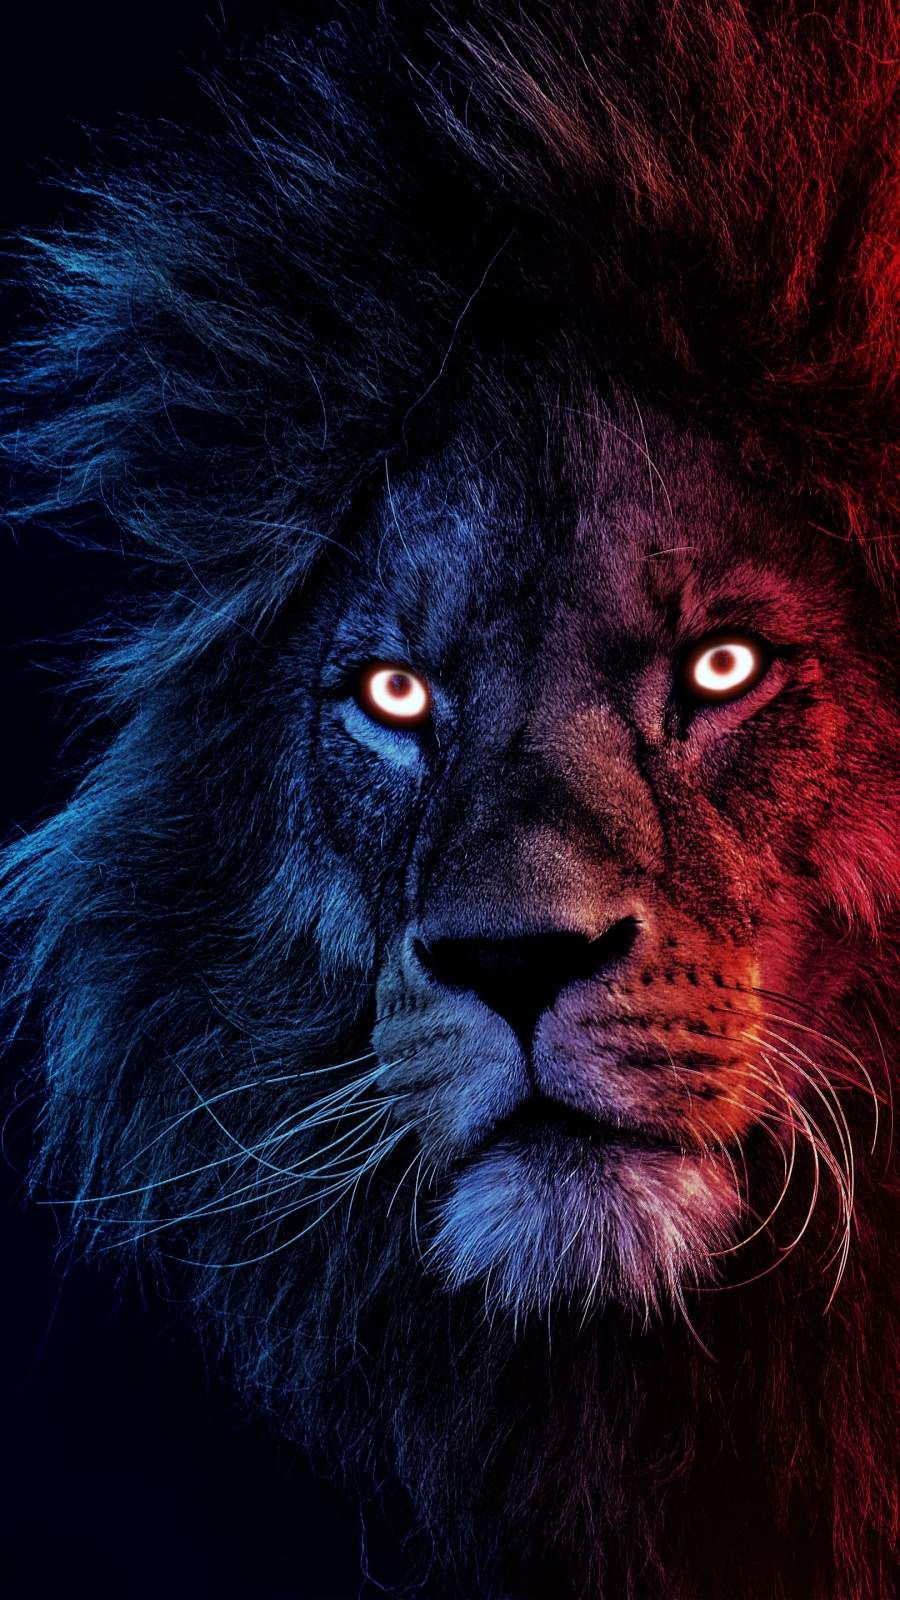 iPhone Wallpaper for iPhone iPhone 11 and iPhone X, iPhone Wallpaper. Lion wallpaper iphone, Lion wallpaper, Lion image